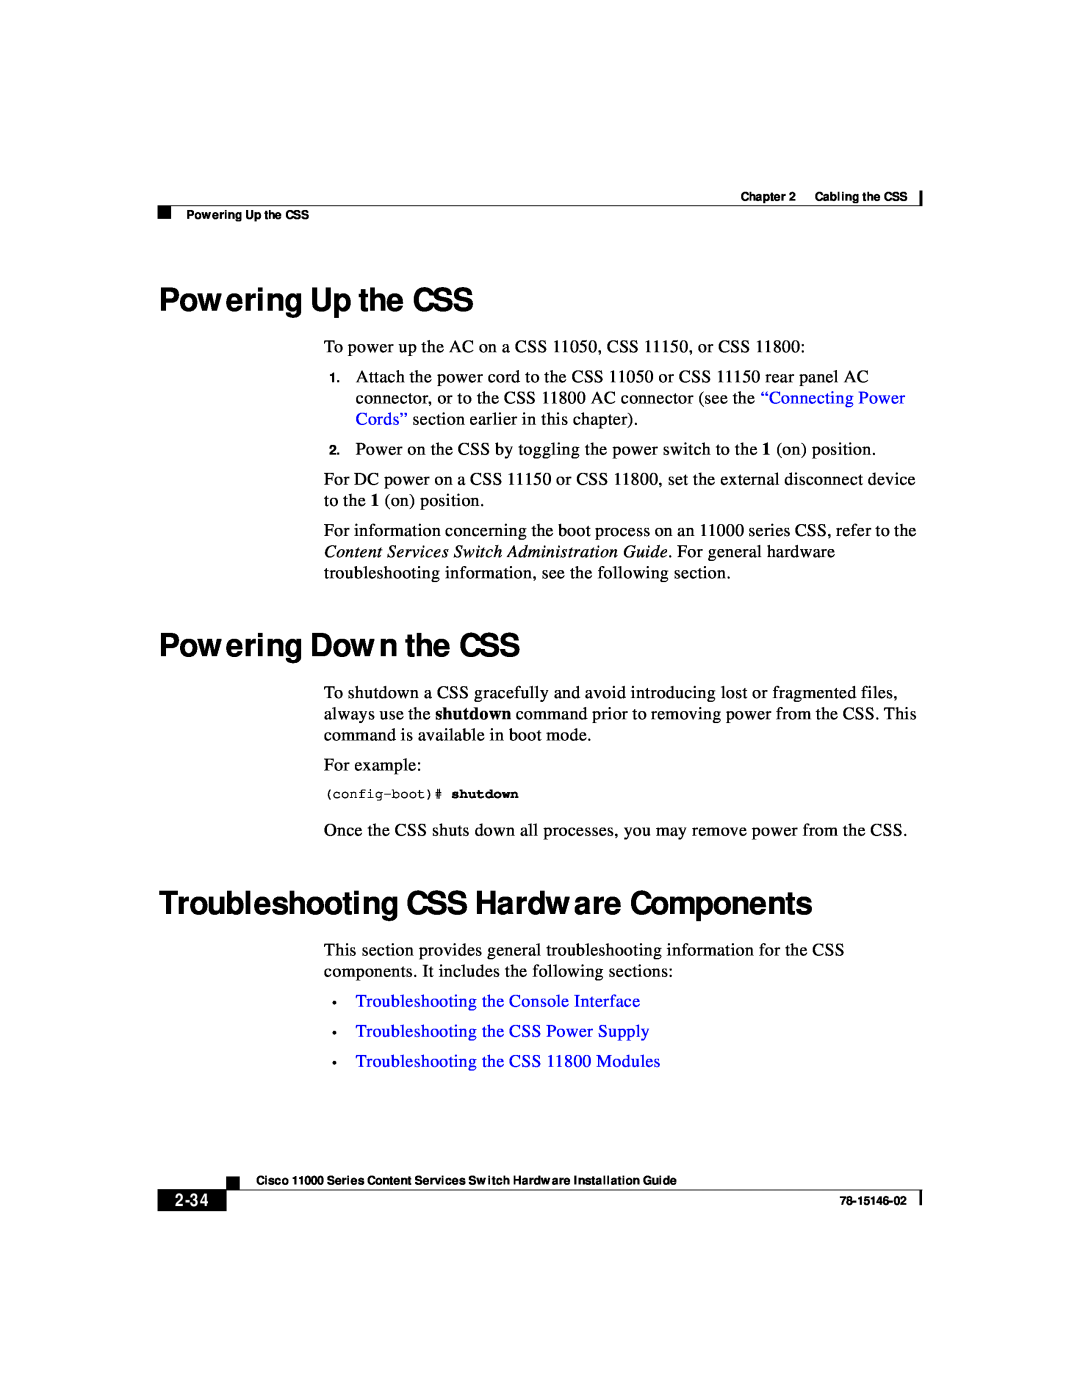 Cisco Systems 11000 Series manual Powering Up the CSS, Powering Down the CSS, Troubleshooting CSS Hardware Components, 2-34 